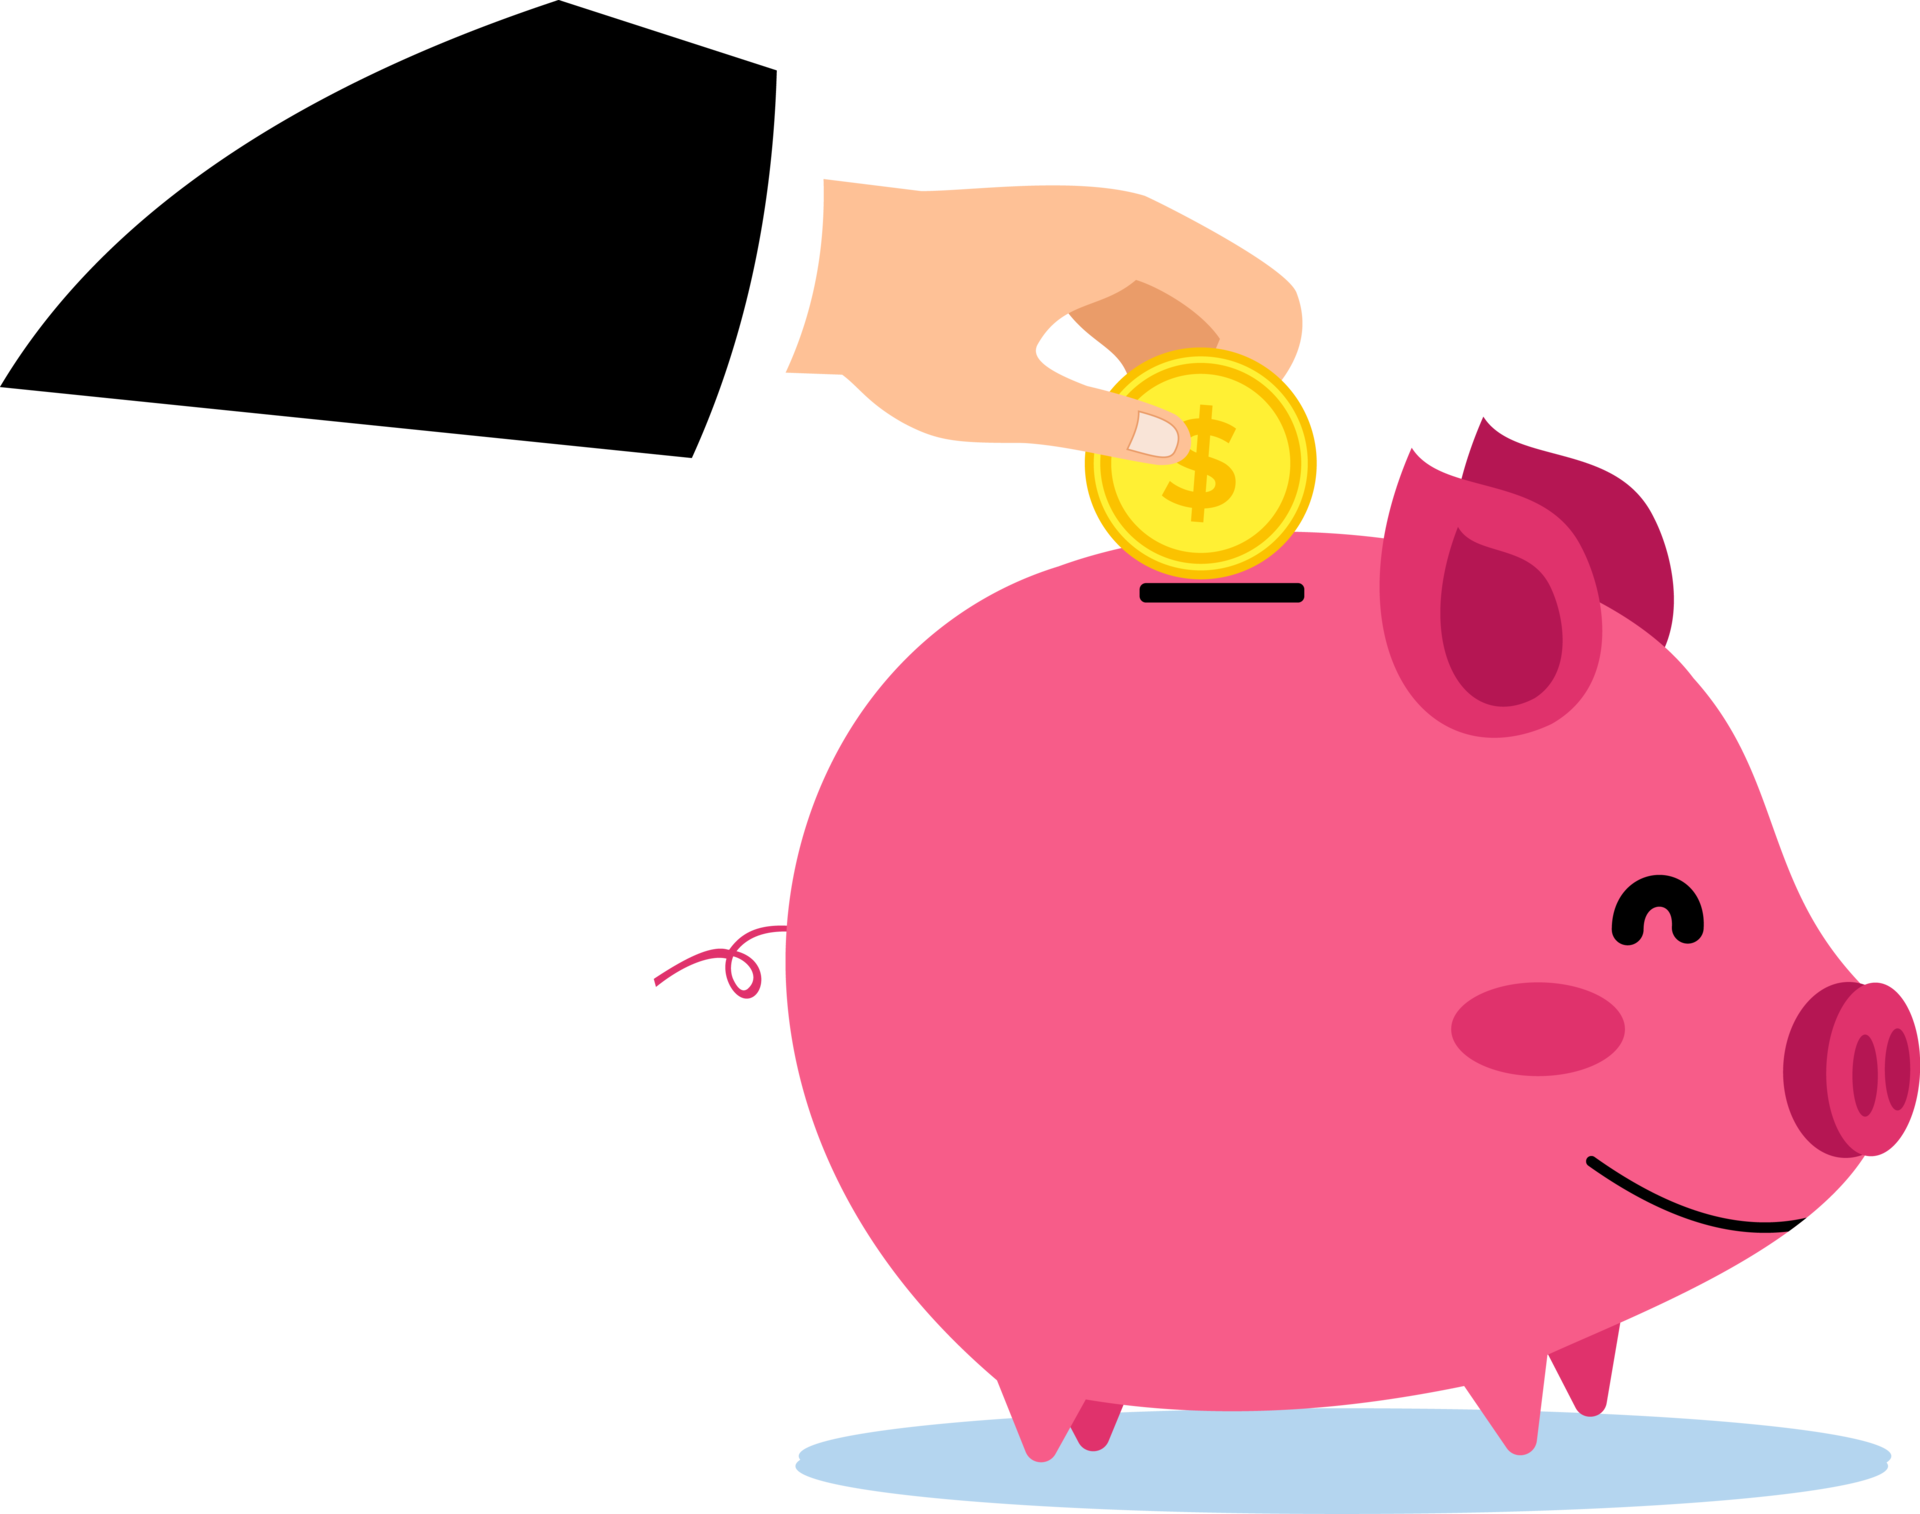 illustration of a businessman's hand saving gold coins in a piggy